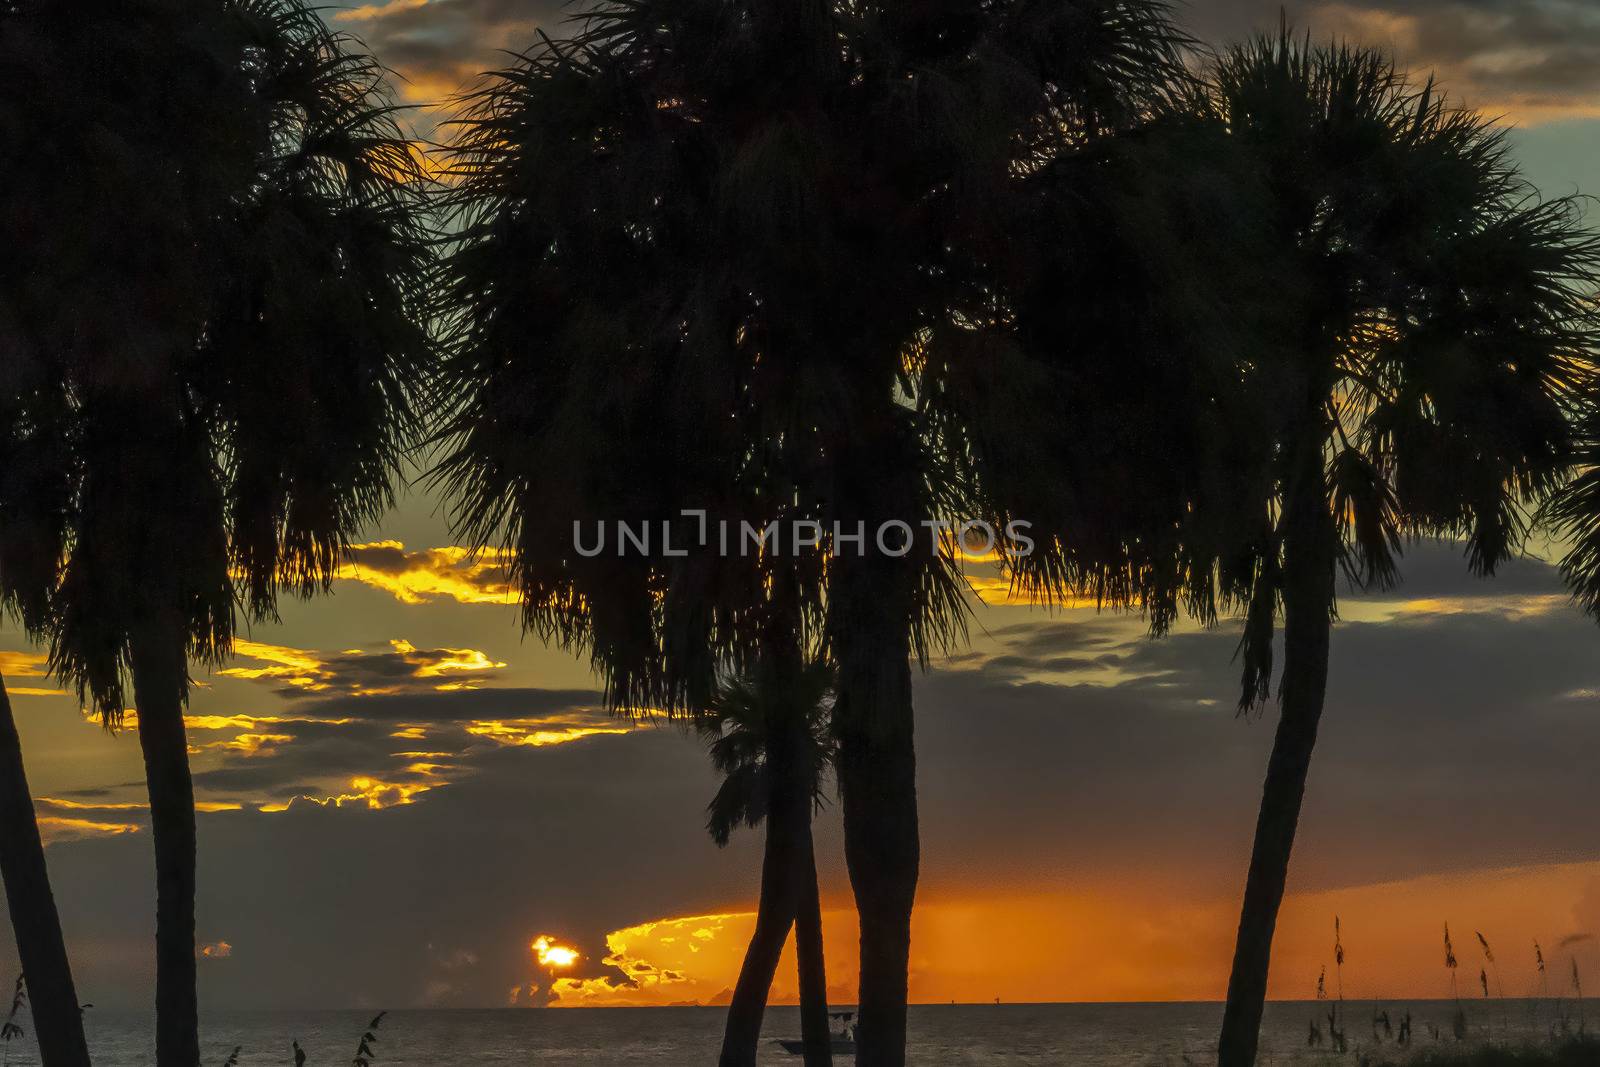 Scenic View Of The Coastline Of The State Of Florida At Sunset by actionsports